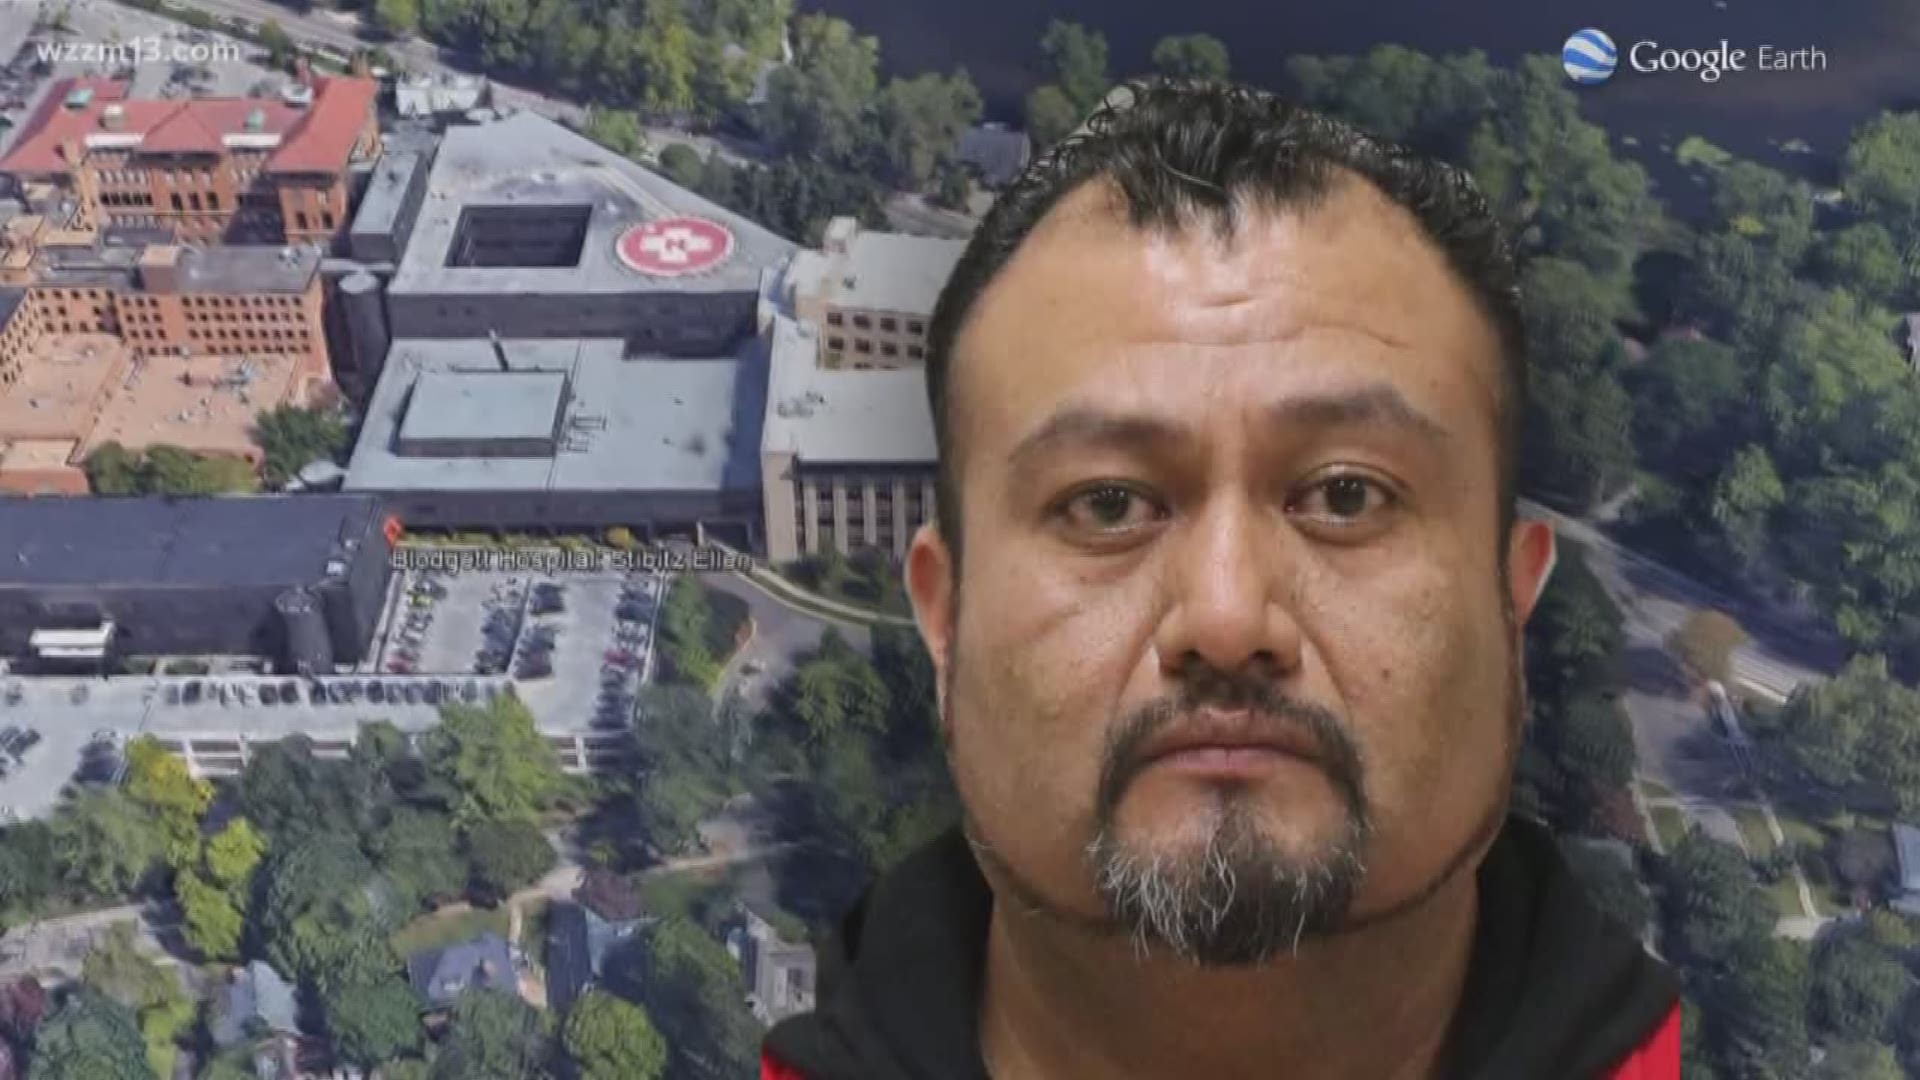 Francisco Muniz, 39, was formally charged Tuesday with fourth degree criminal sexual conduct. He was in court Wednesday for a probable cause hearing.